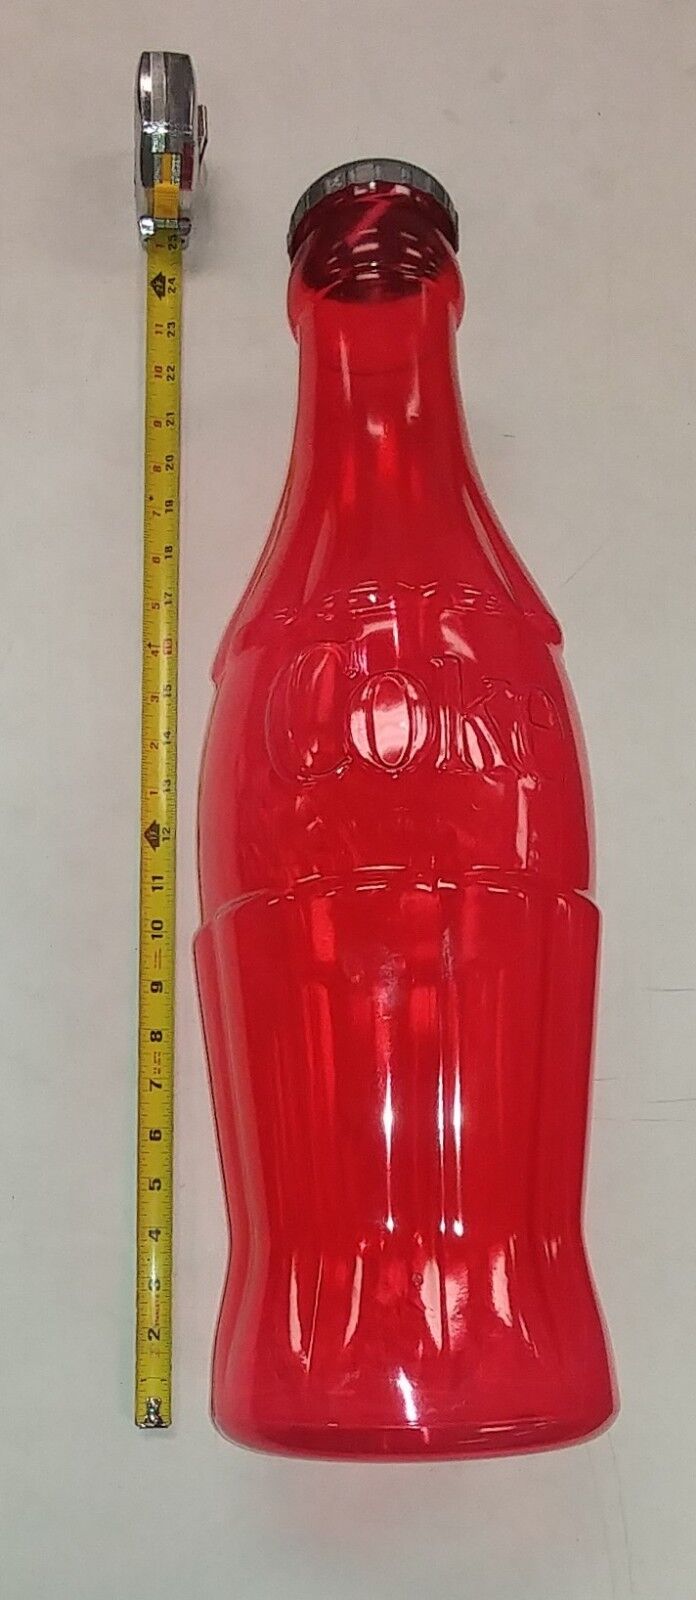 NEW Large 23" Coca Cola Bottle Bank Coins Coke Red or Clear - Free USA Shipping! Coca-Cola - фотография #3